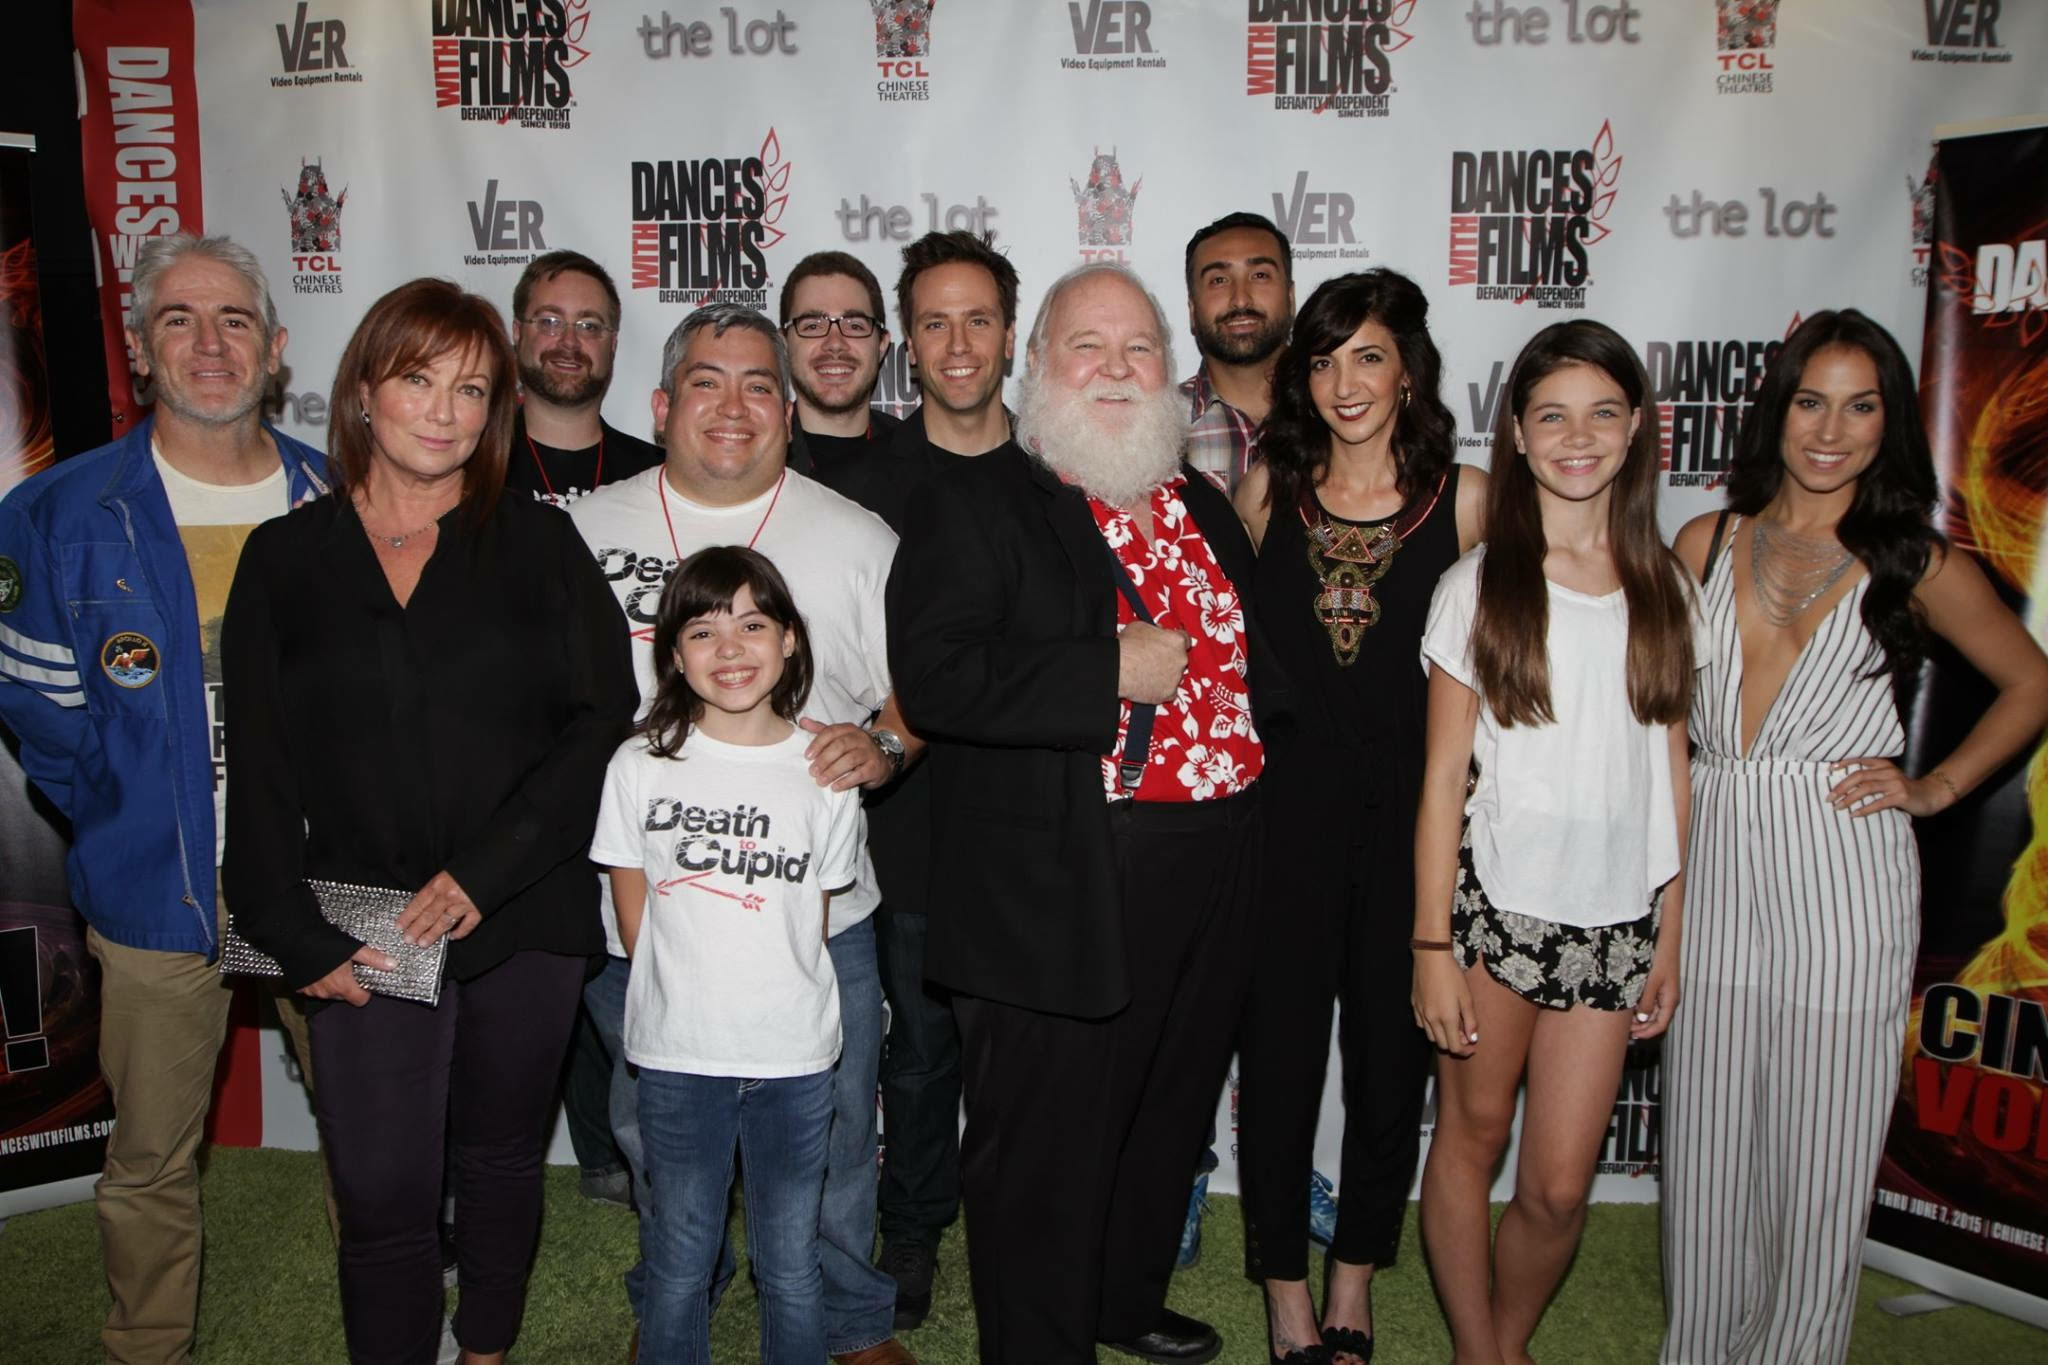 Part of the Cast/Crew of 'Death To Cupid' at 'Dances With Films' Festival 2015.